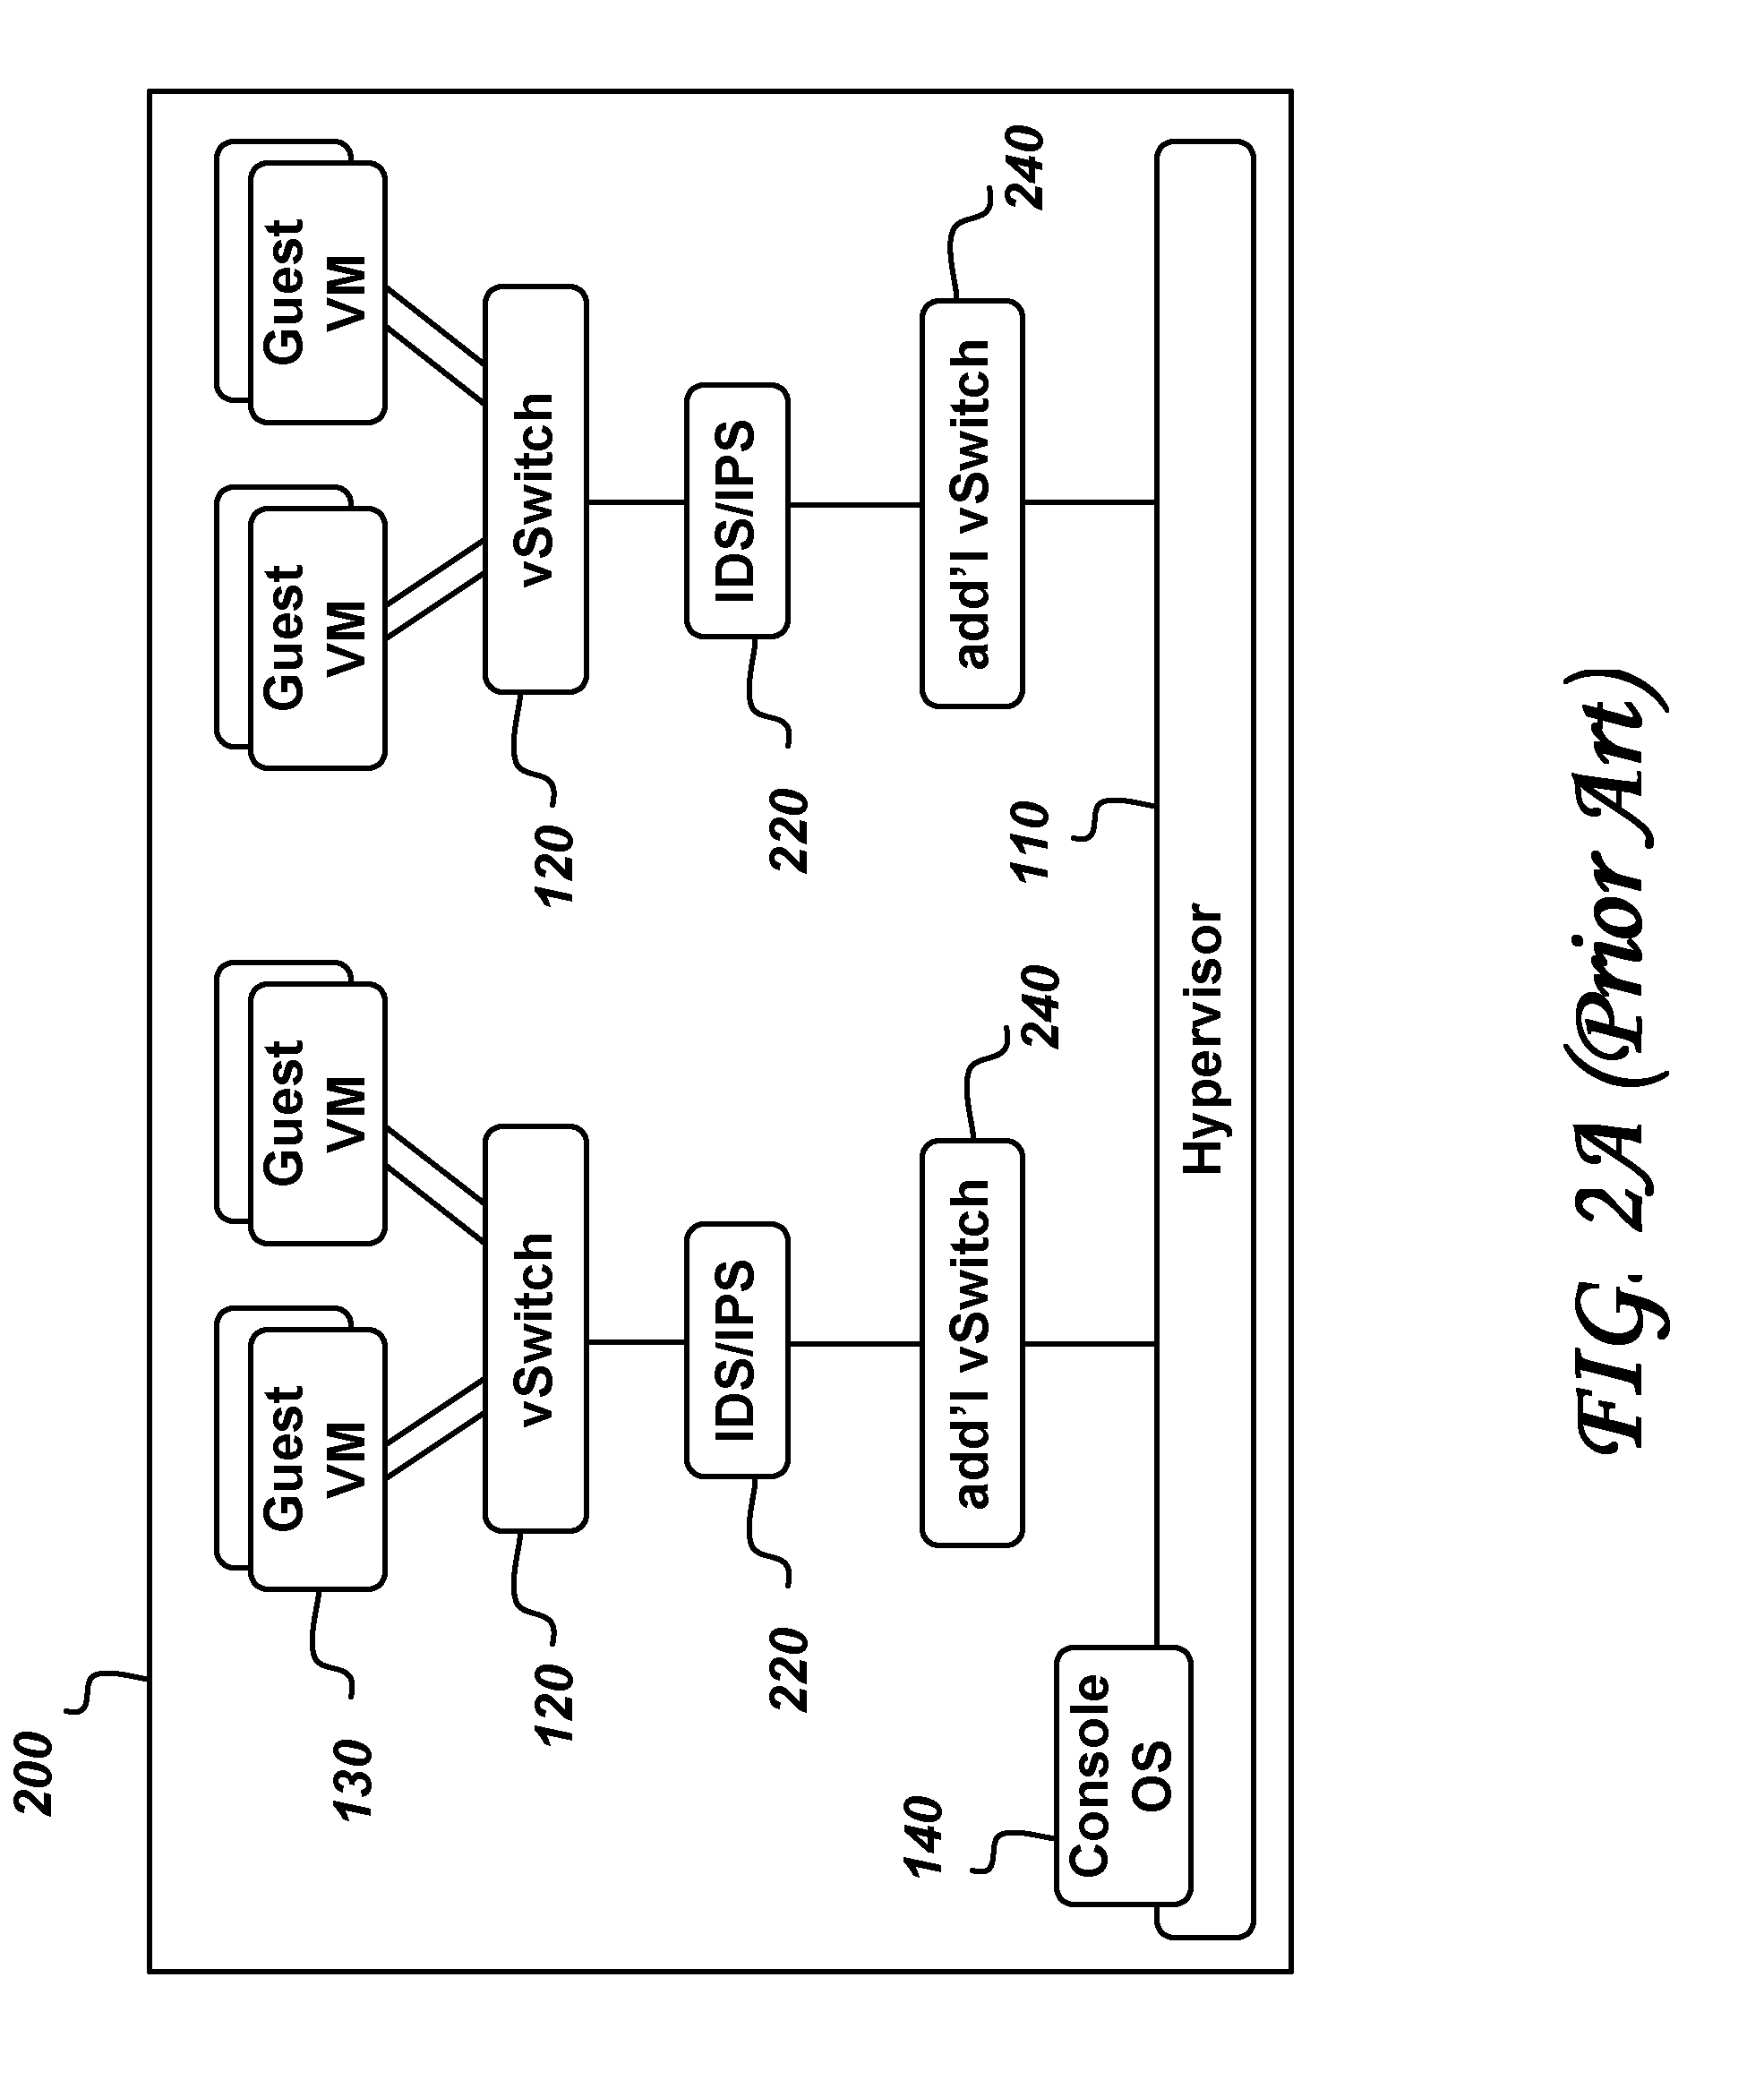 System and method for intelligent coordination of host and guest intrusion prevention in virtualized environment